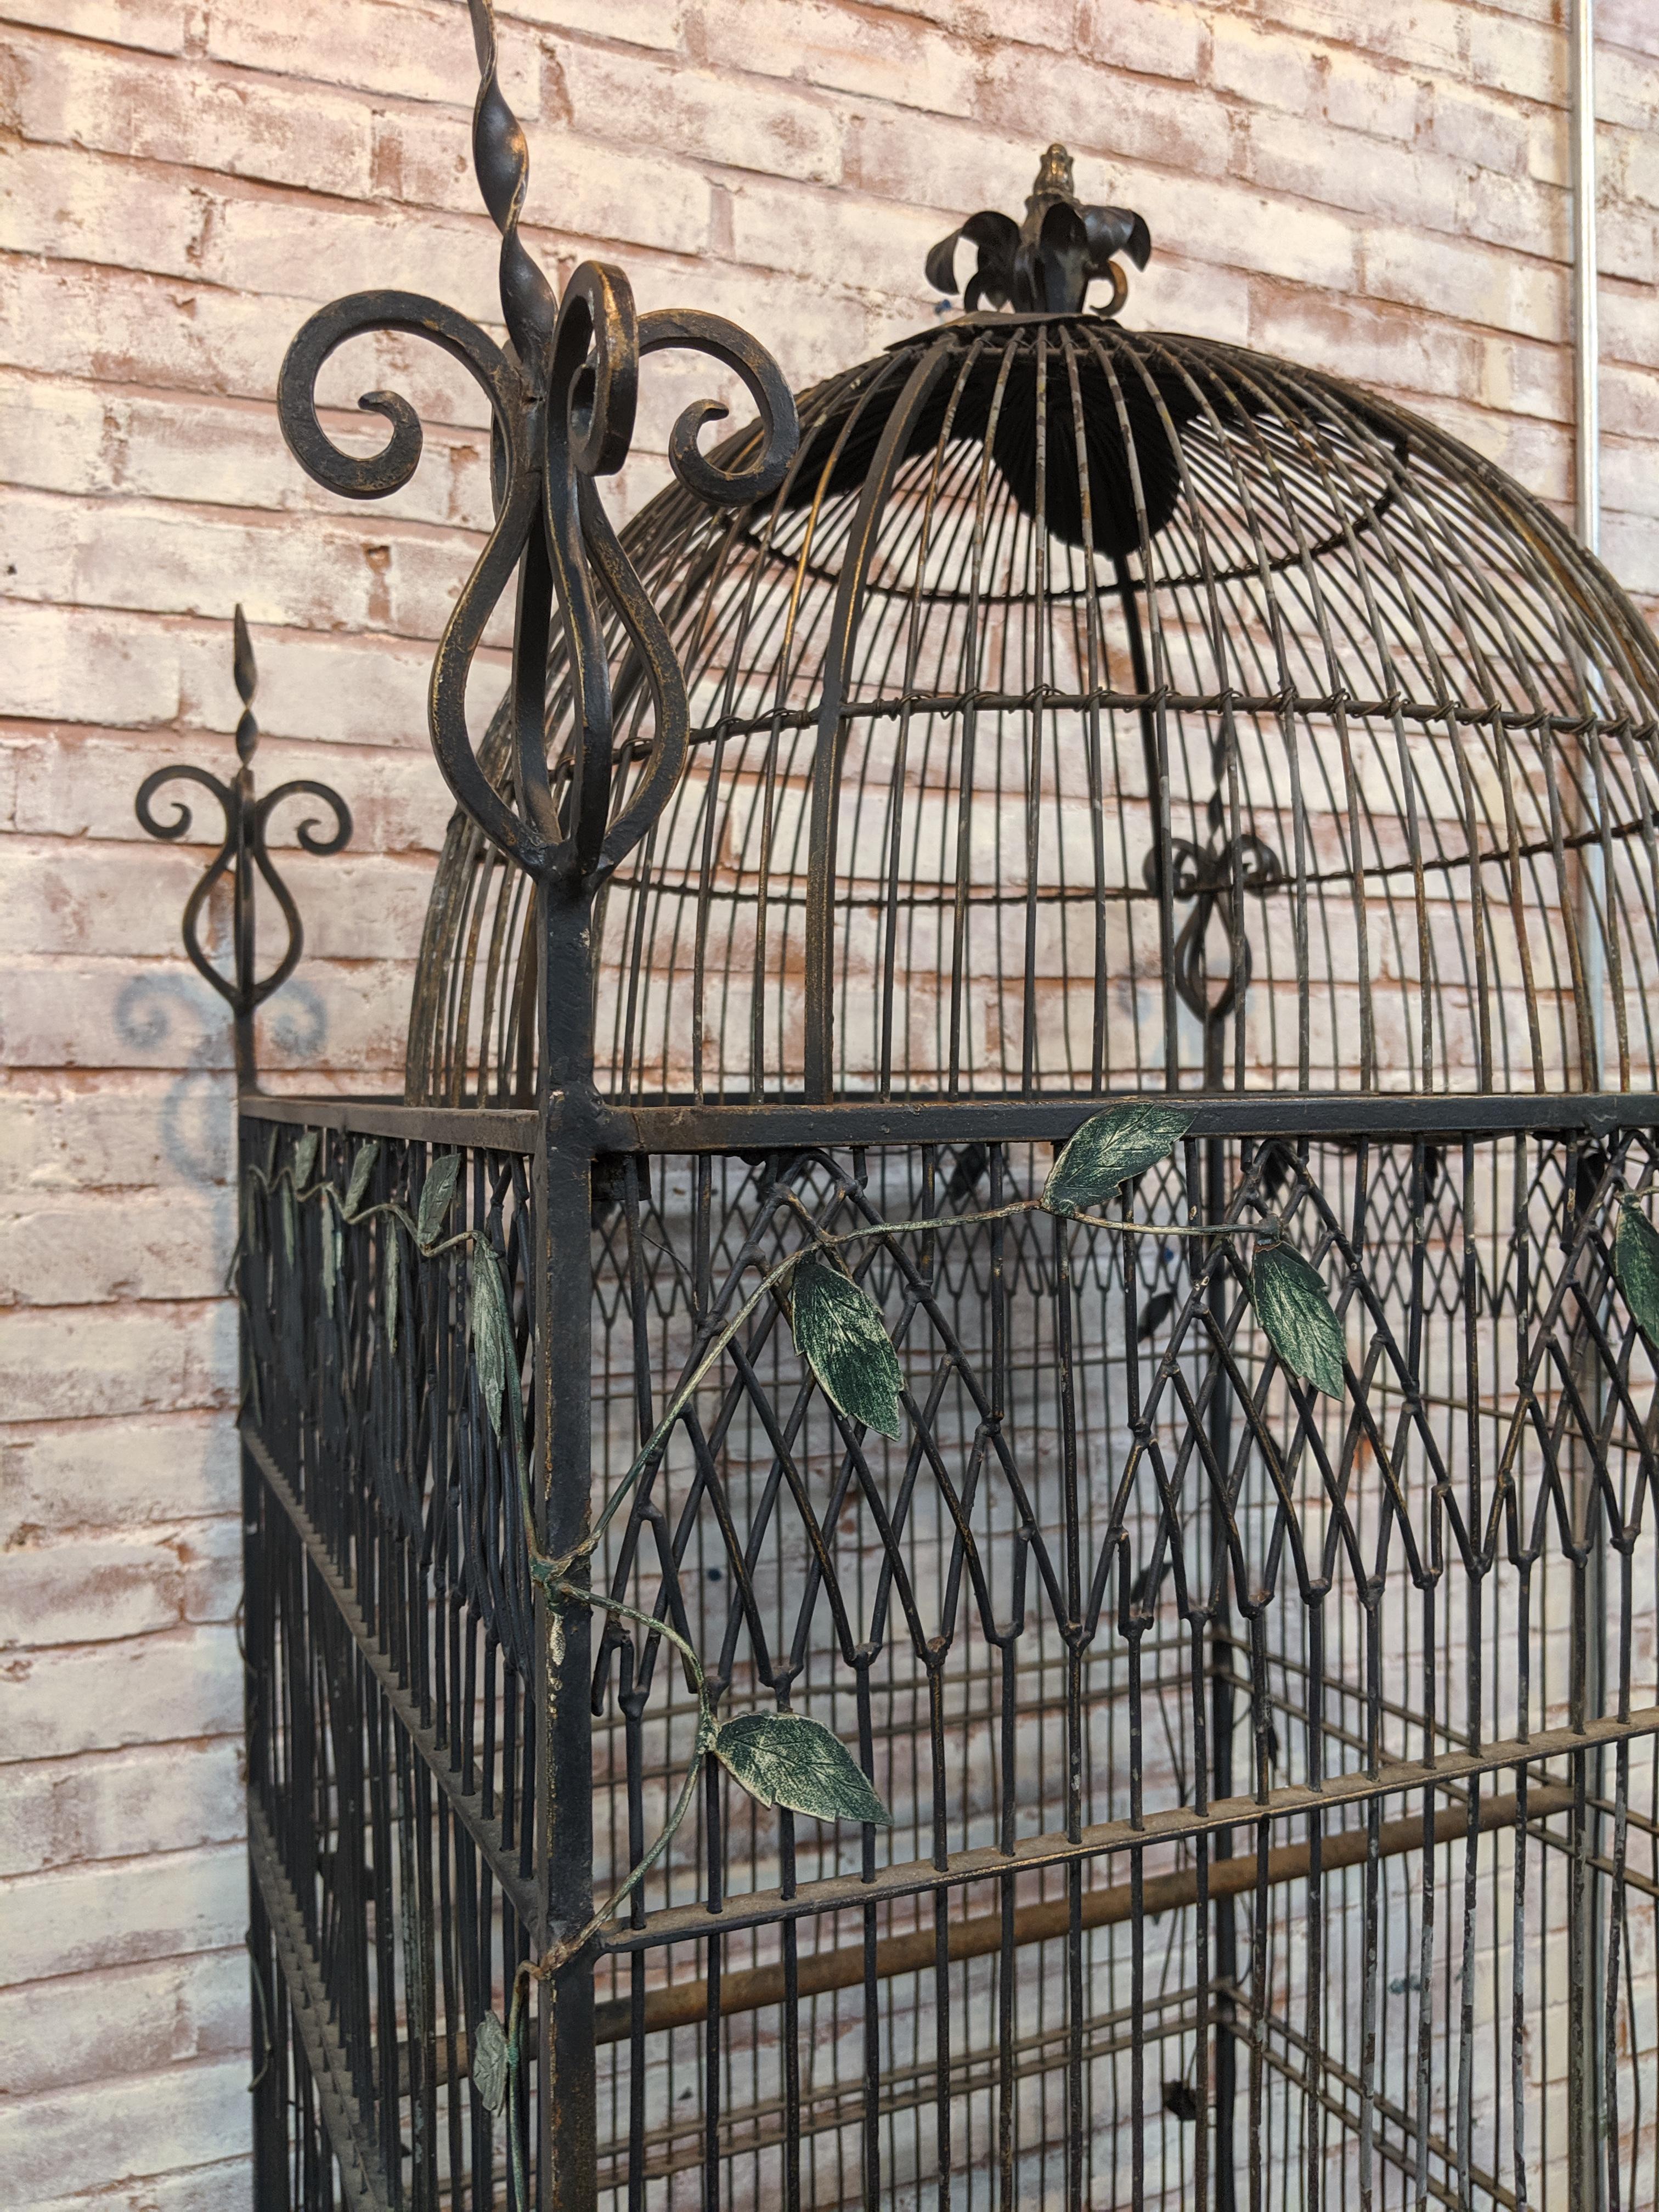 Beautiful wrought iron vintage birdcage. Cage is decorated with ornate finials at each corner and has a leaf motif all around the sides and top. Cage rests upon an ornate wrought iron stand. Base measures 27